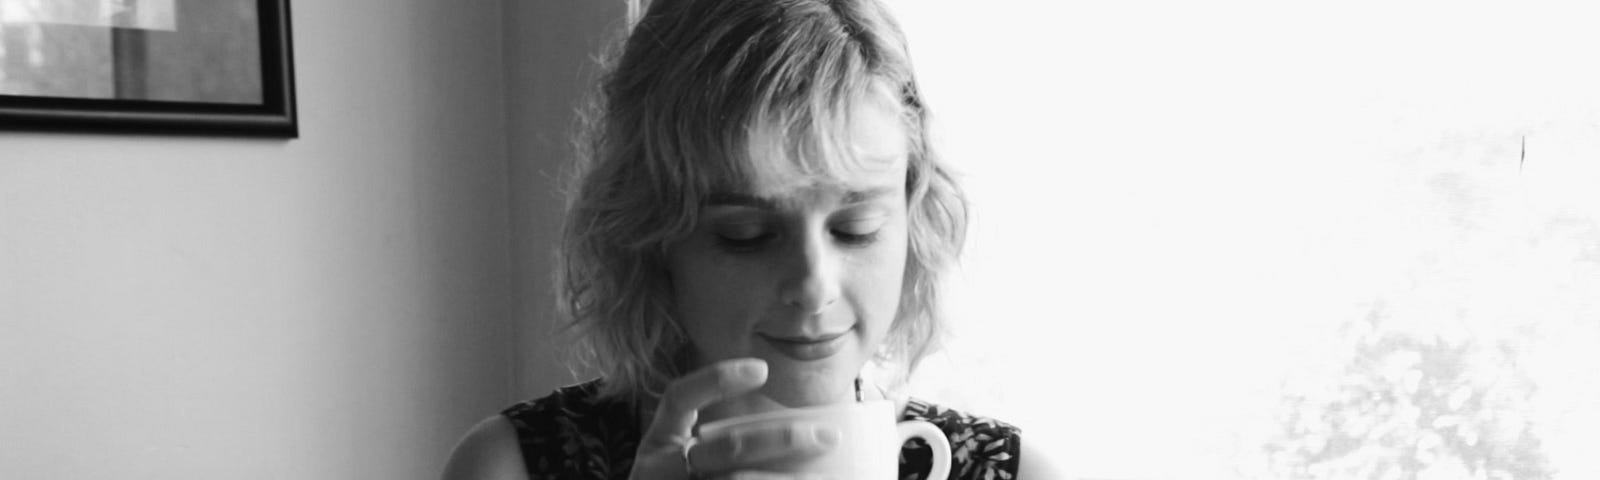 A black and white photo of a woman drinking a cup of coffee by a window in her home.